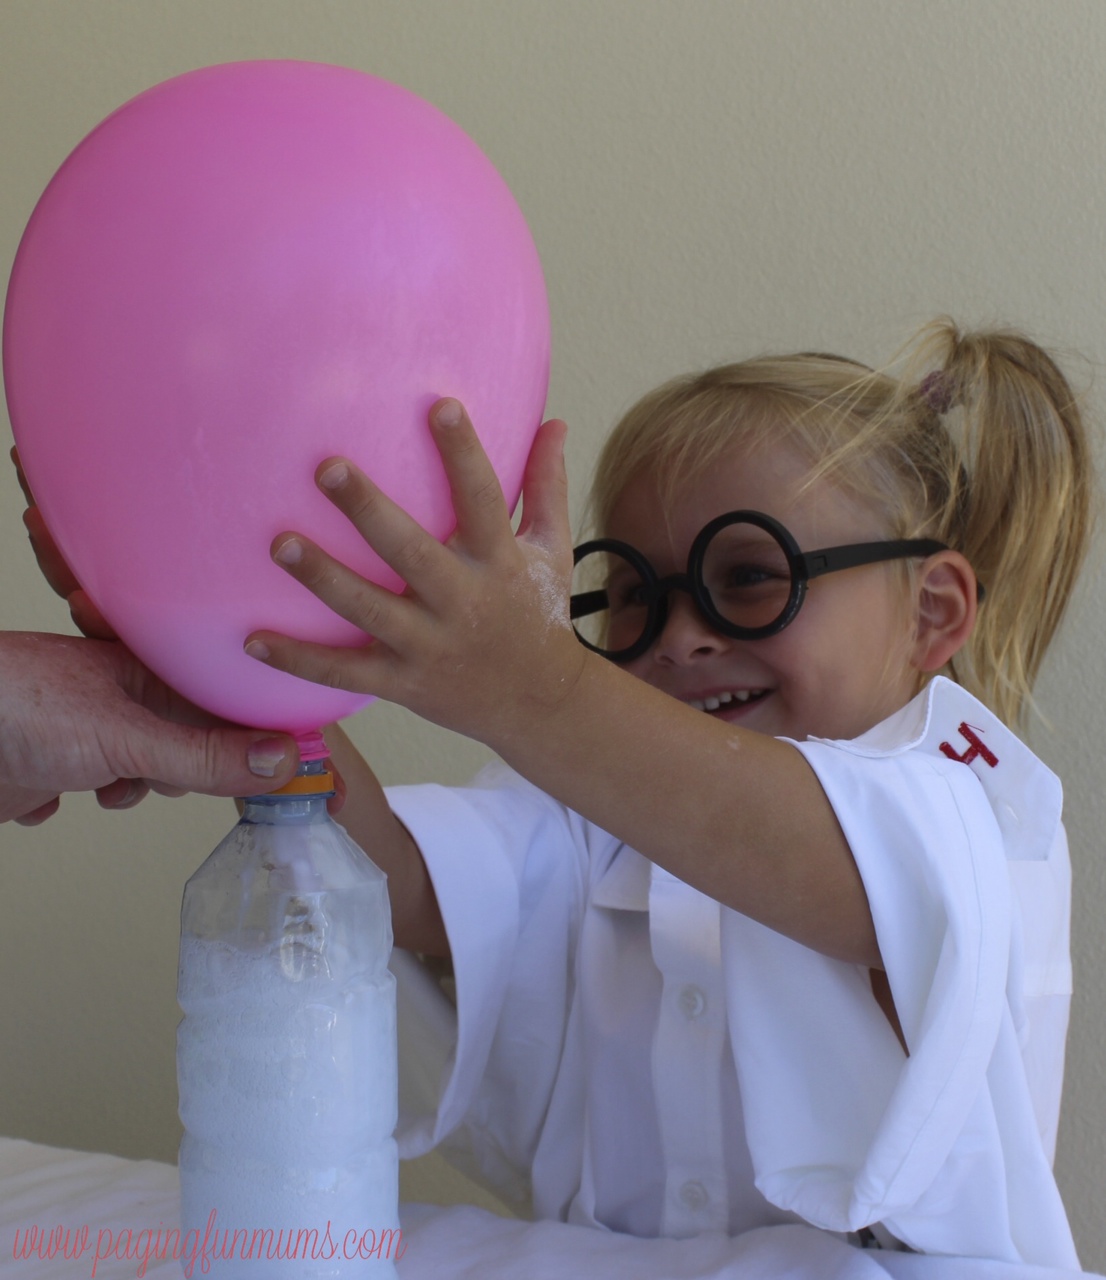 Watch as your balloon magically inflates!